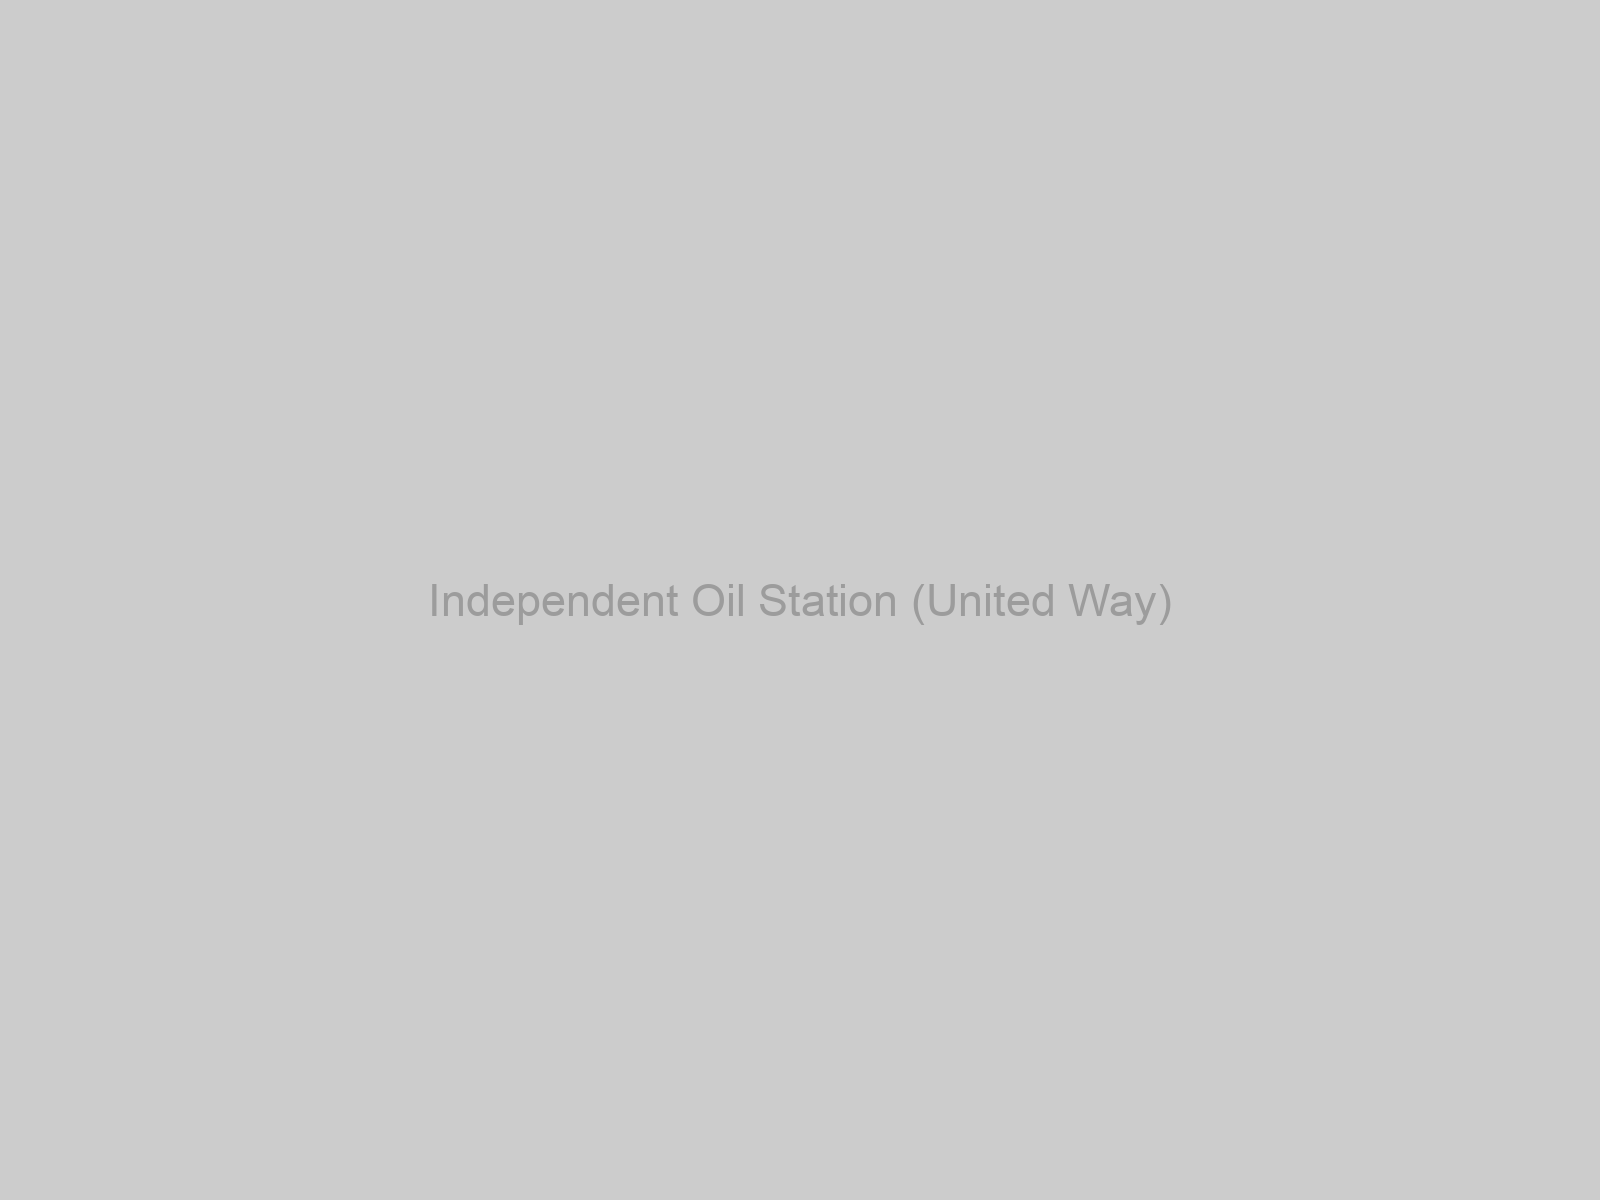 Independent Oil Station (United Way)